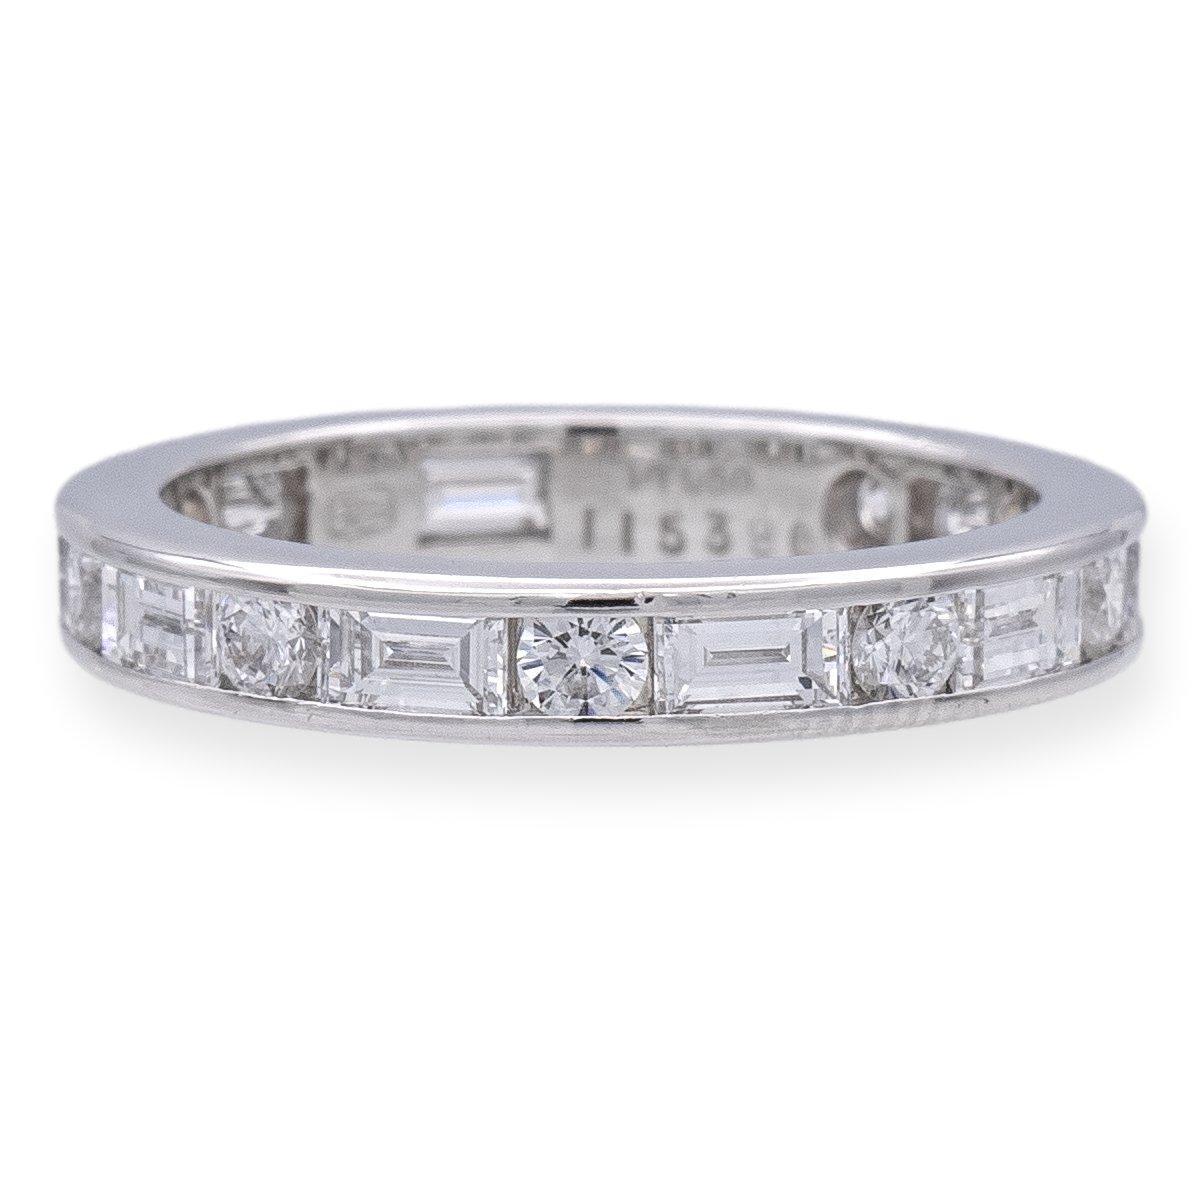 Vintage Harry Winston Wedding Band Ring finely crafted in platinum, this exquisite piece features a continuous pattern of alternating round and straight baguette diamonds in a seamless channel setting, with a total of 10 straight baguette diamonds